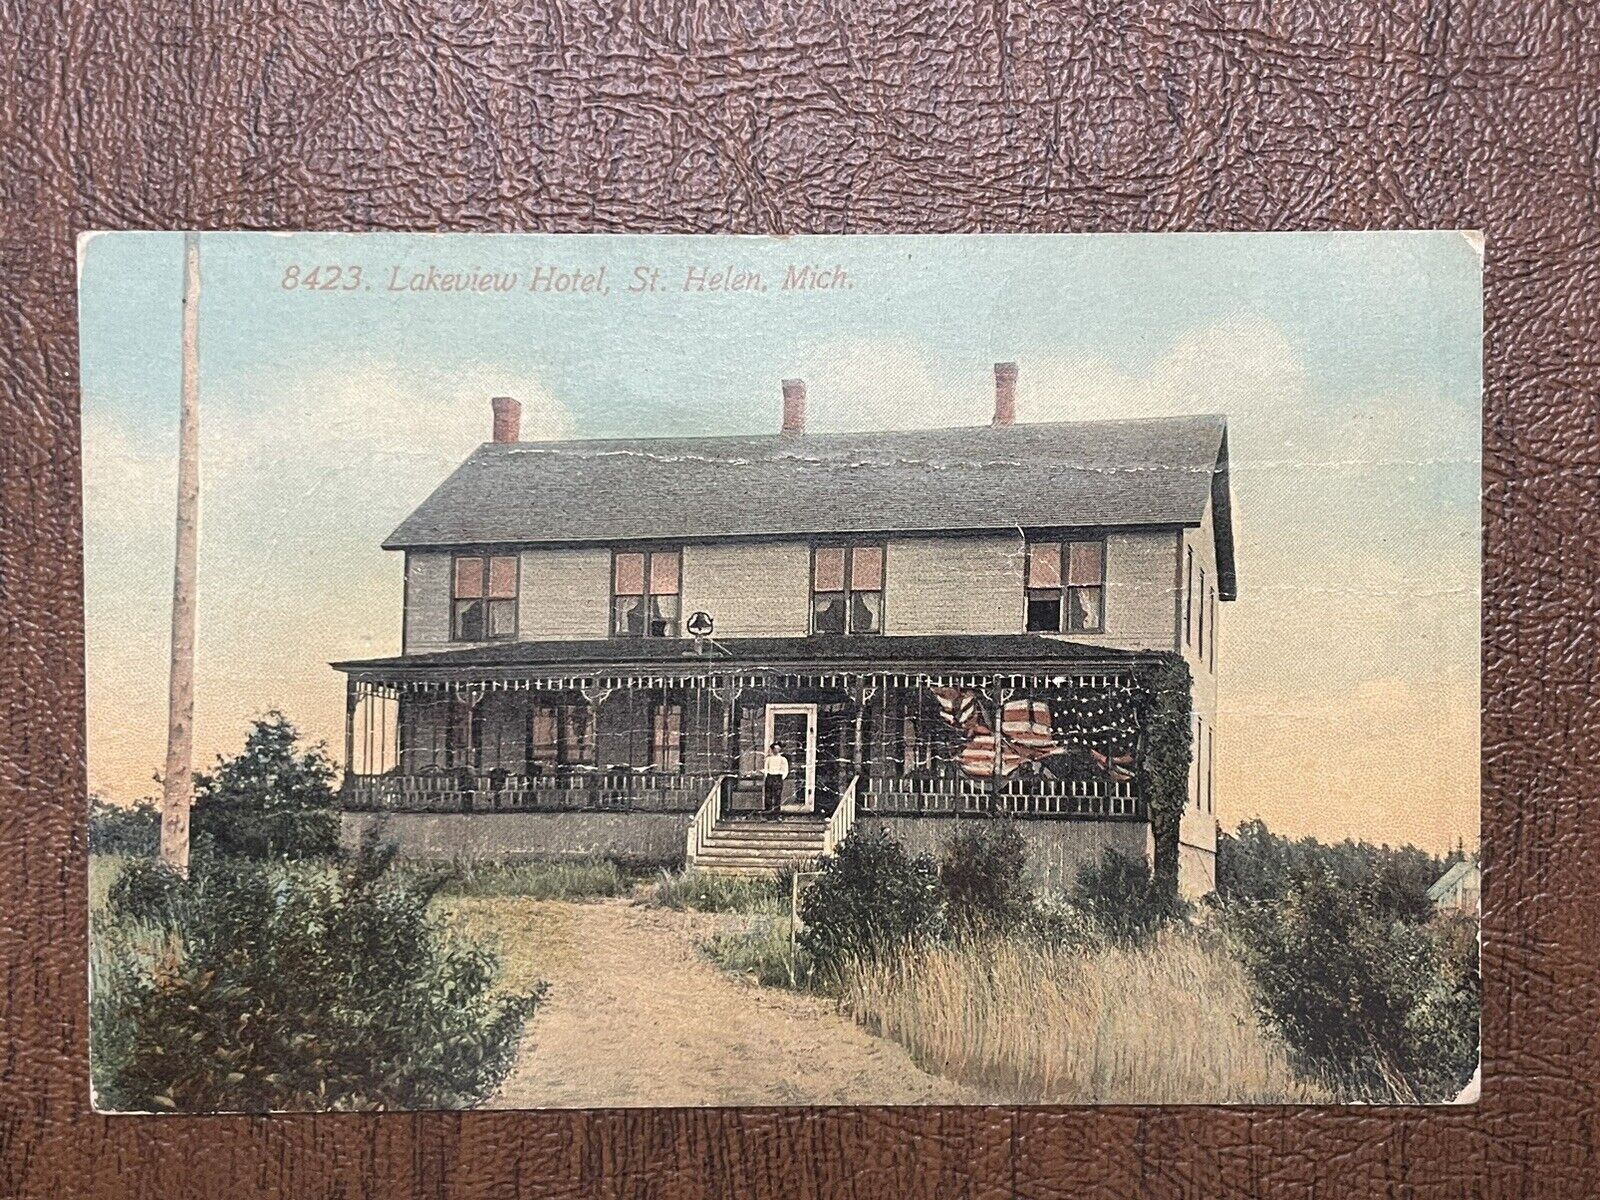 8423 Lakeview Hotel Early 1900s ST. HELEN MICHIGAN Postcard By Paul Petosky